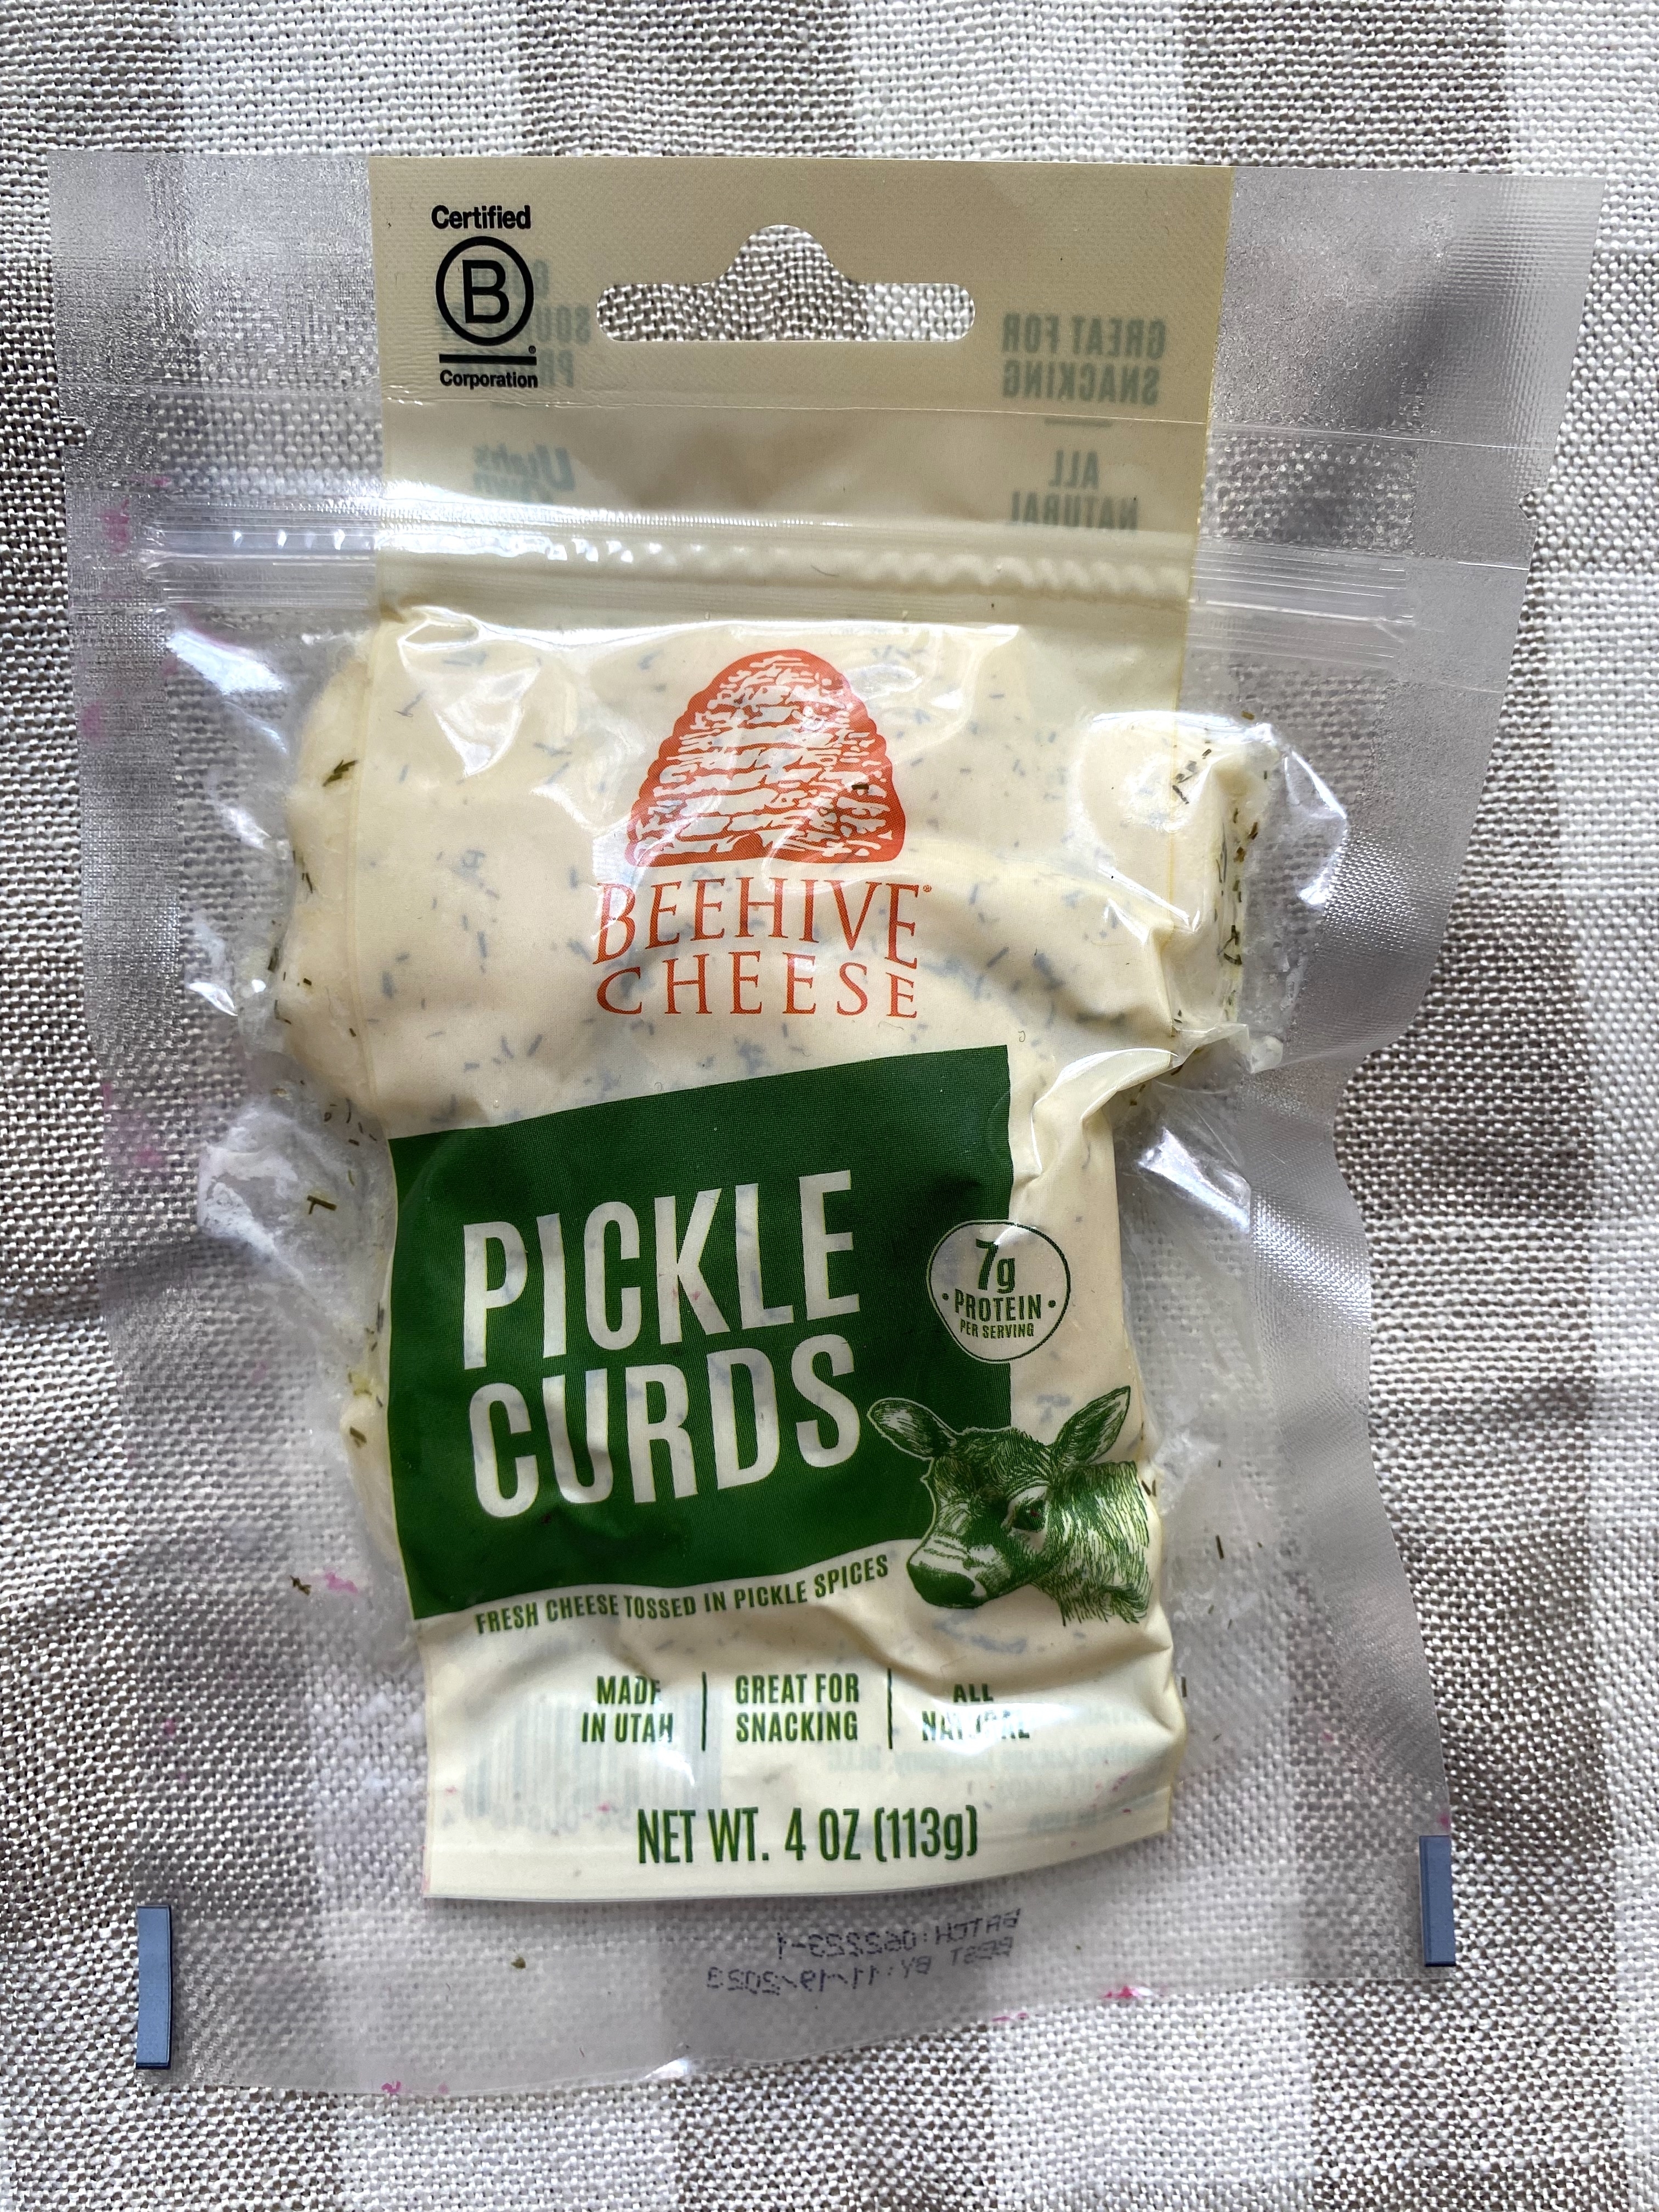 A bag of pickle cheese curds